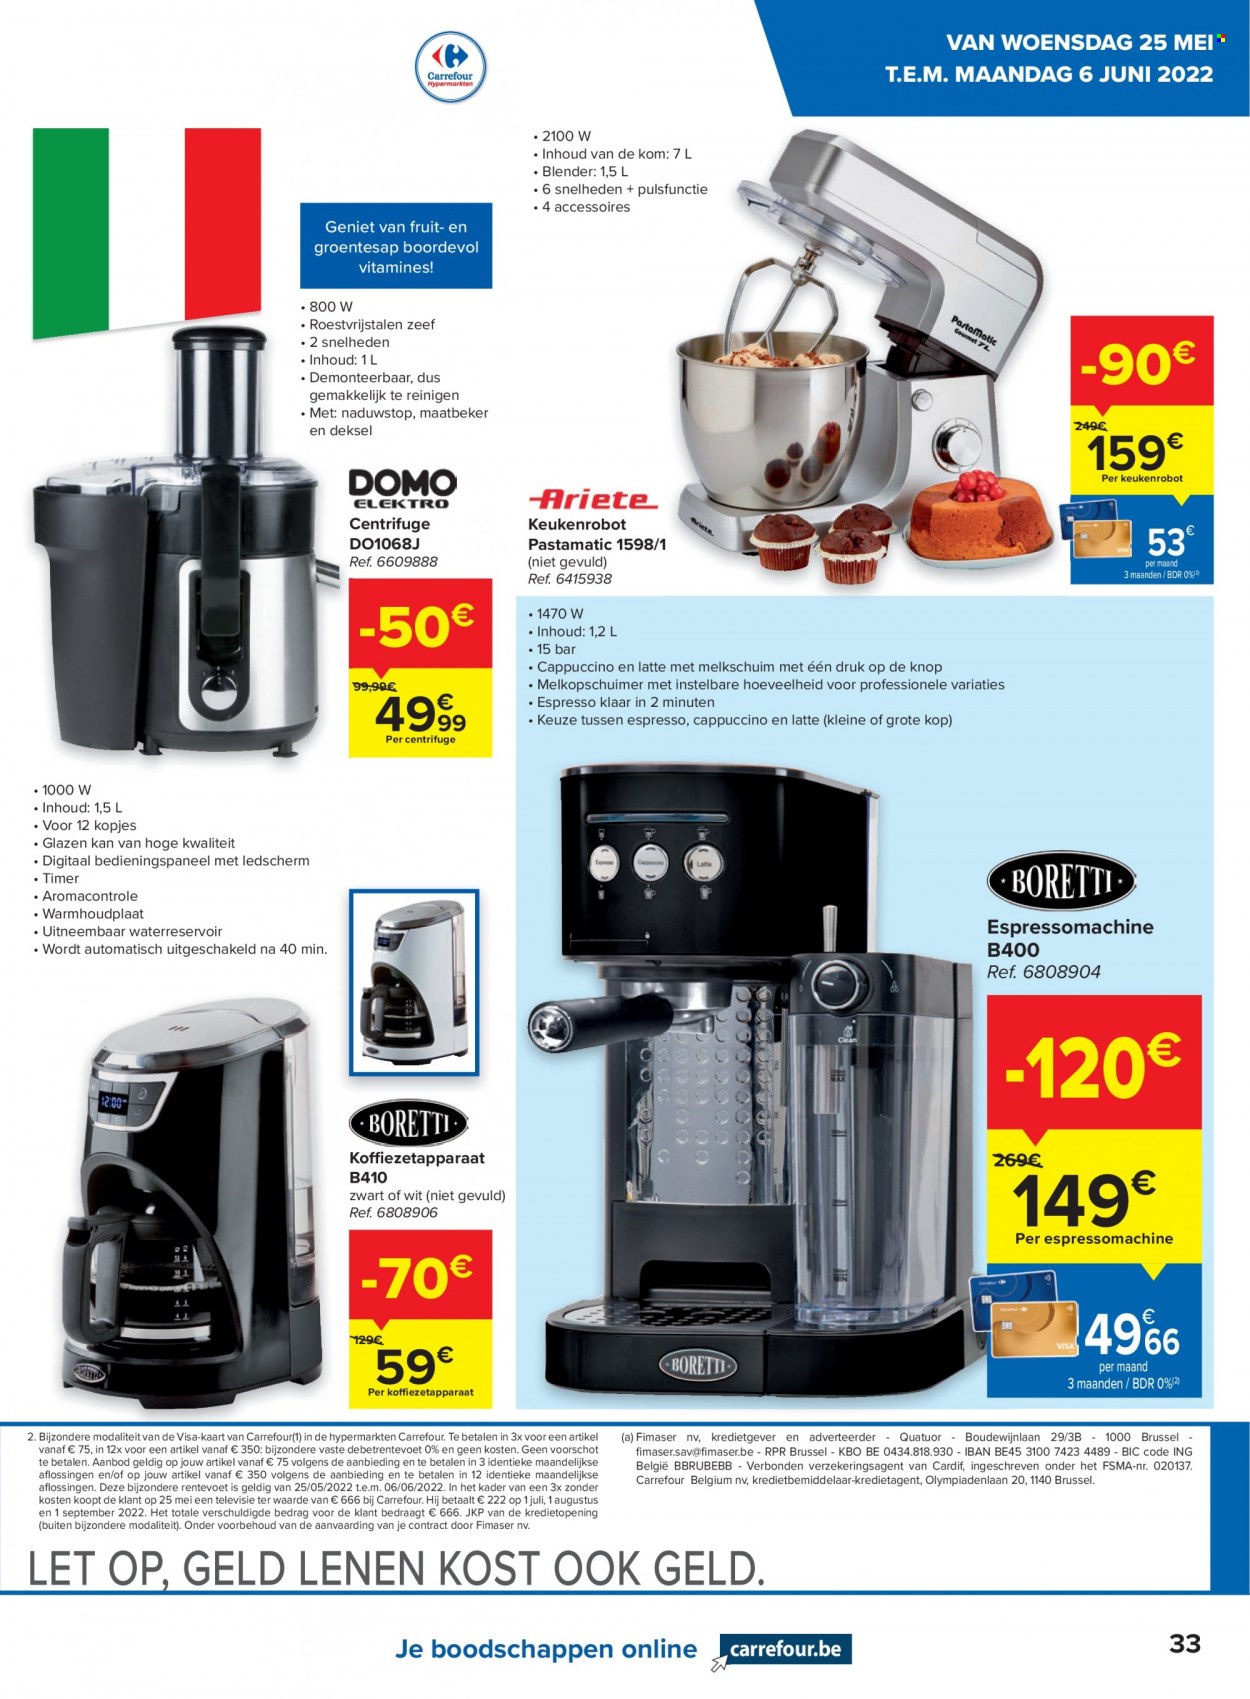 Catalogue Carrefour hypermarkt - 24.5.2022 - 30.5.2022. Page 33.